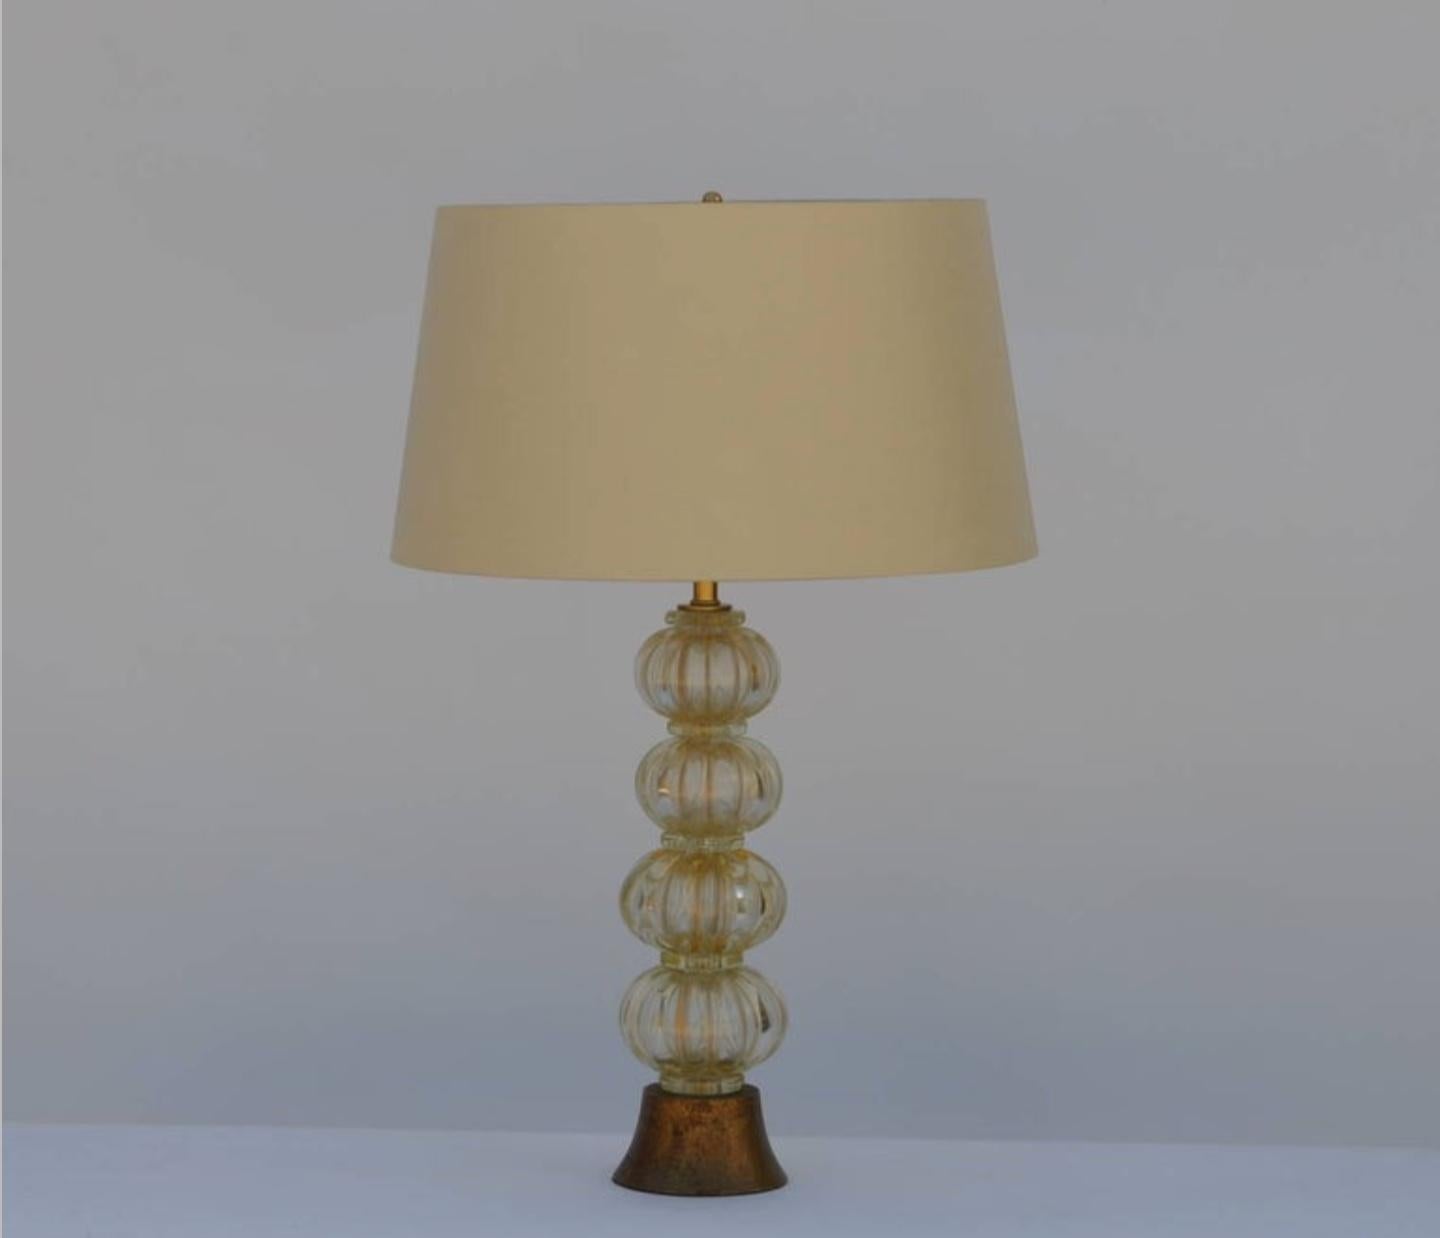 Heavy gilt Murano glass stem lamp with custom silk shade in the style of Barovier. Giltwood base. Restored and rewired with gold twist cord.

Custom shade dimensions: upper edge 16 inches, lower edge 19 inches, height 10.5 inches. Overall lamp